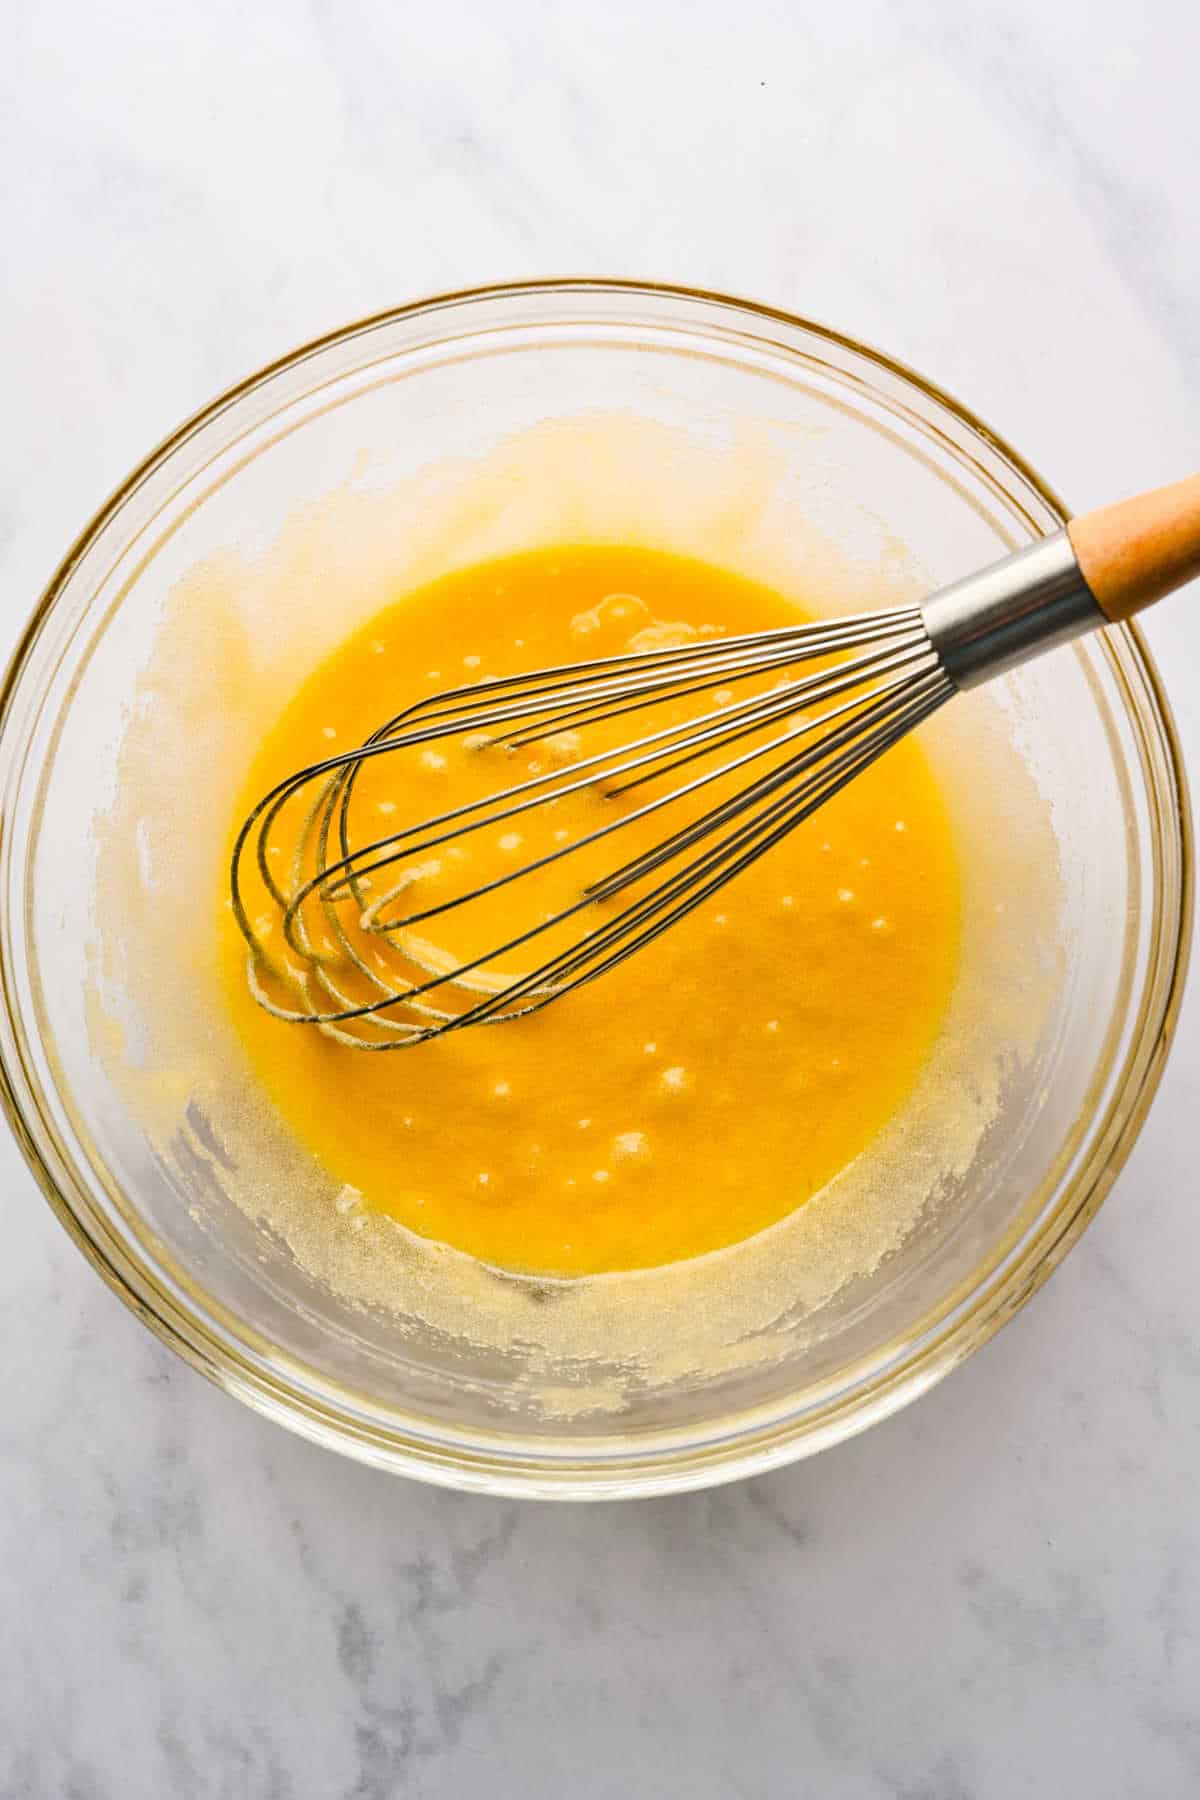 Egg mixture in a glass mixing bowl with a whisk in it.